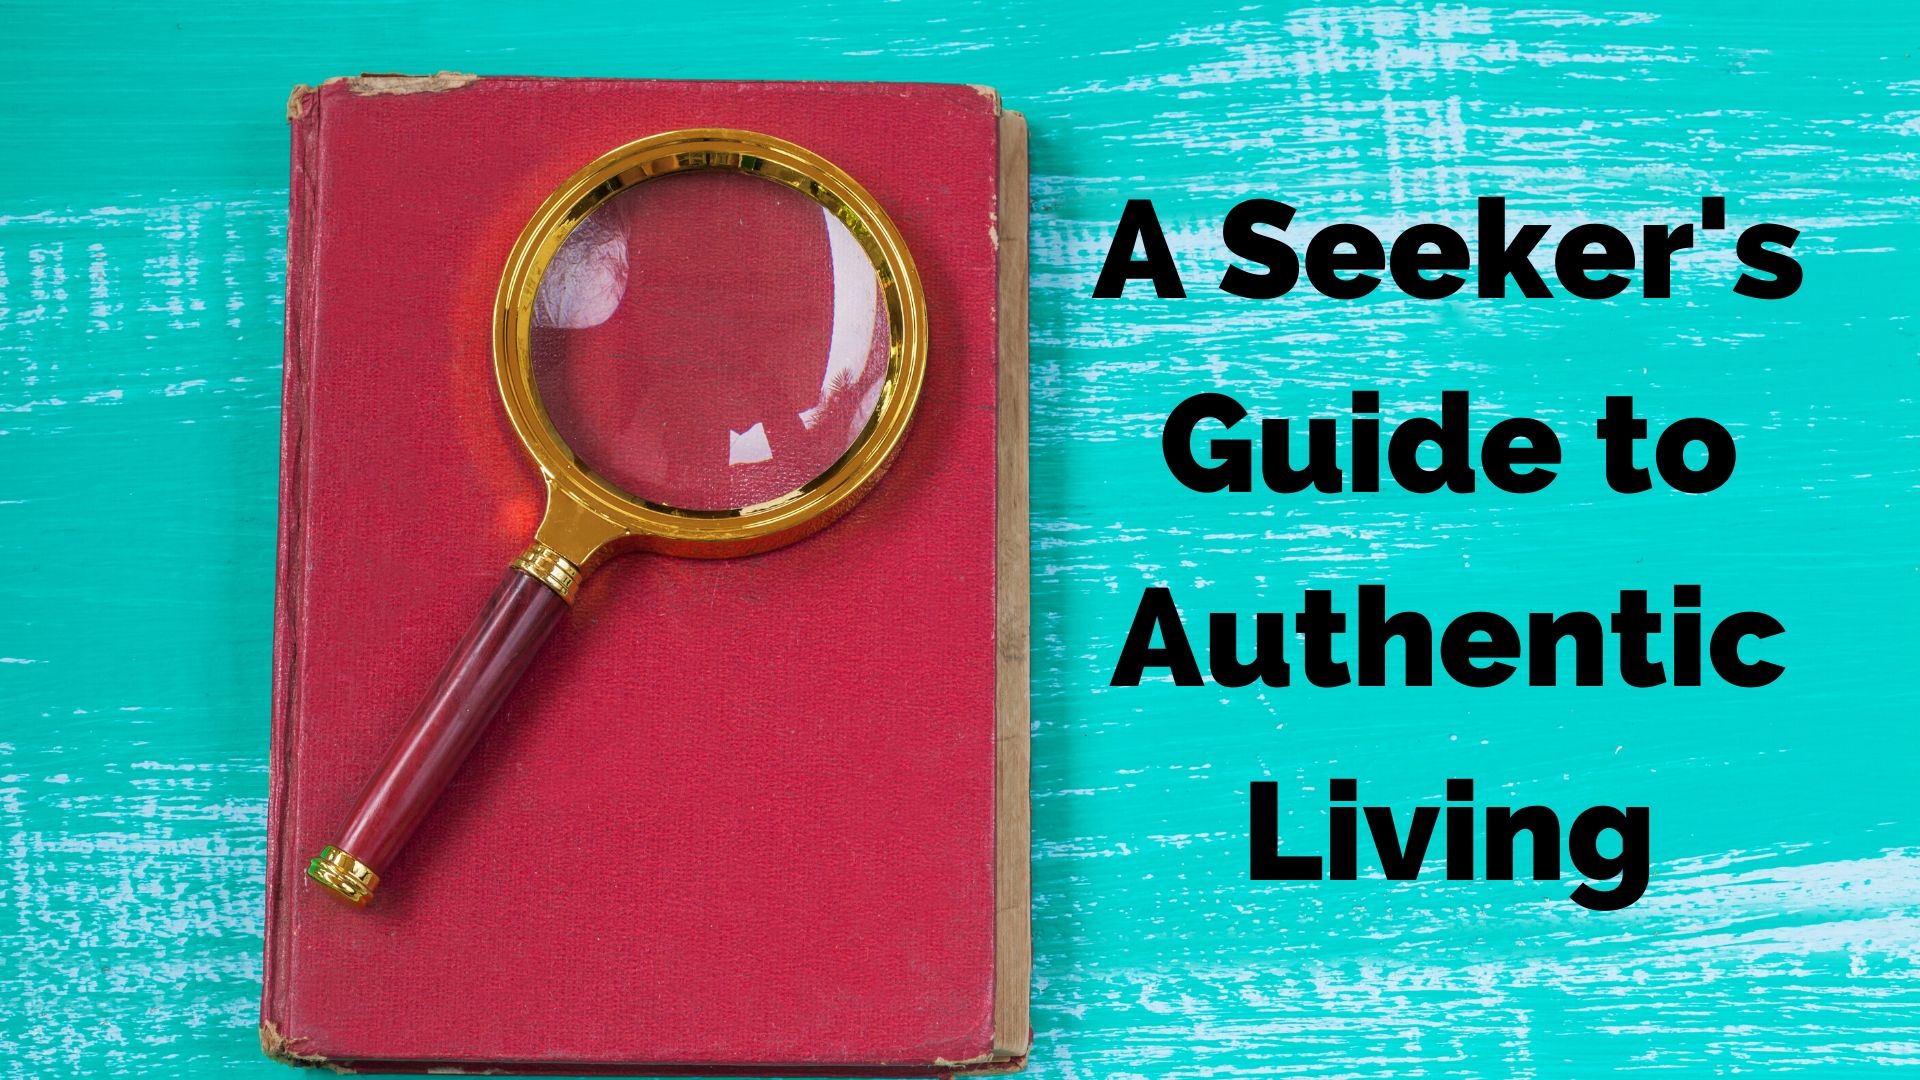 A Seeker's Guide to Authentic Living